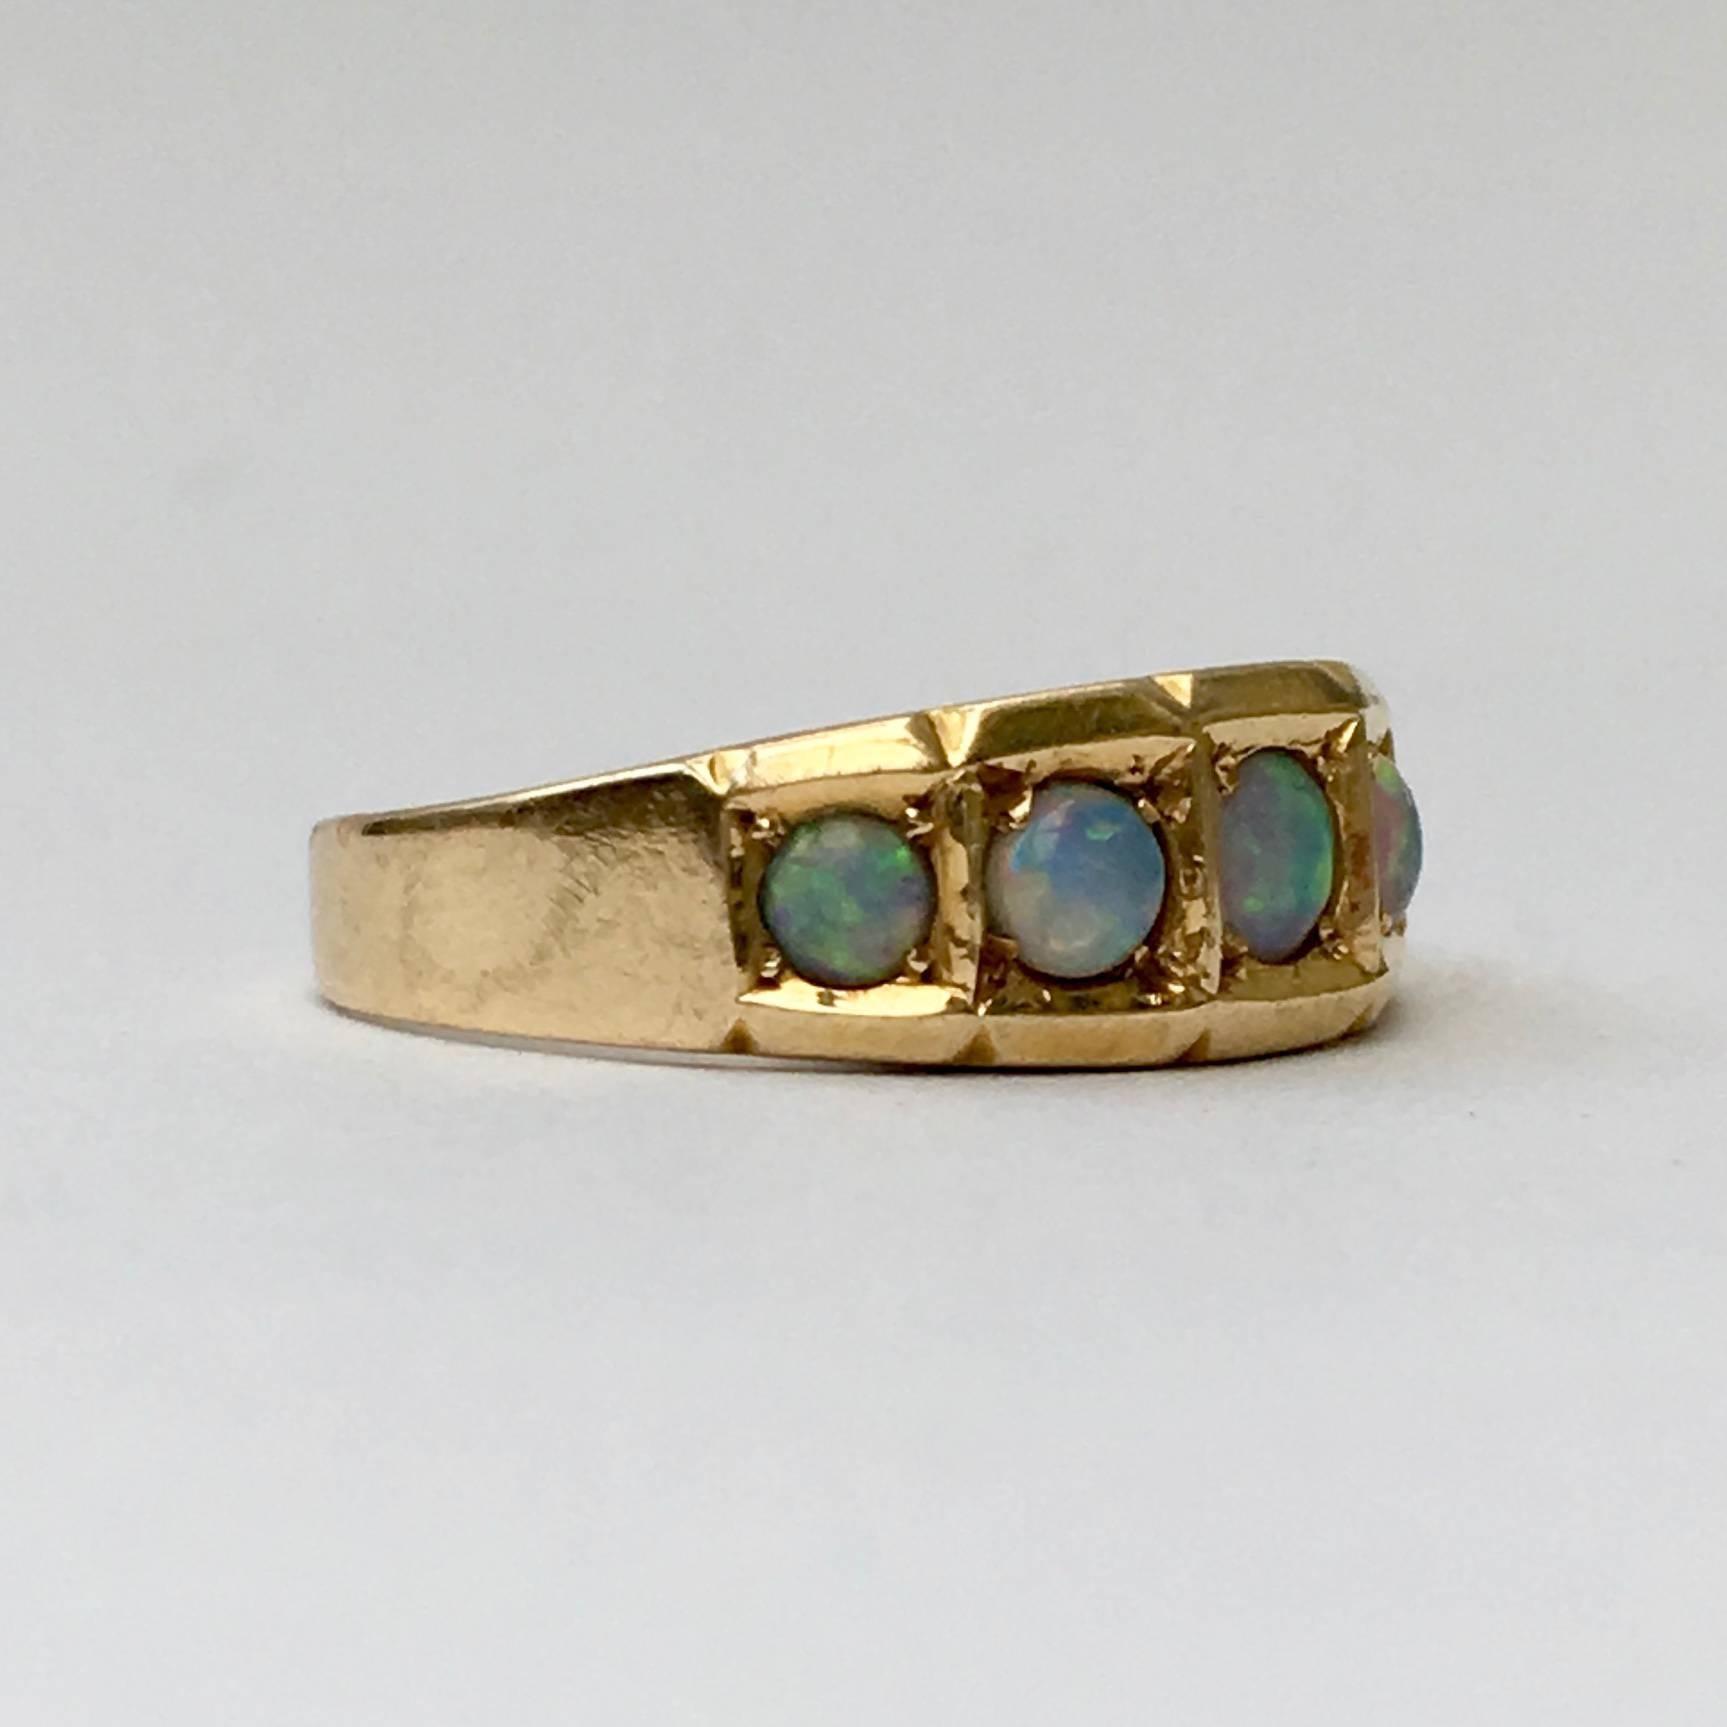 Opal Ring 18 Carat Gold Vintage Jewelry Five-Stone Band Victorian Antique Rings 1